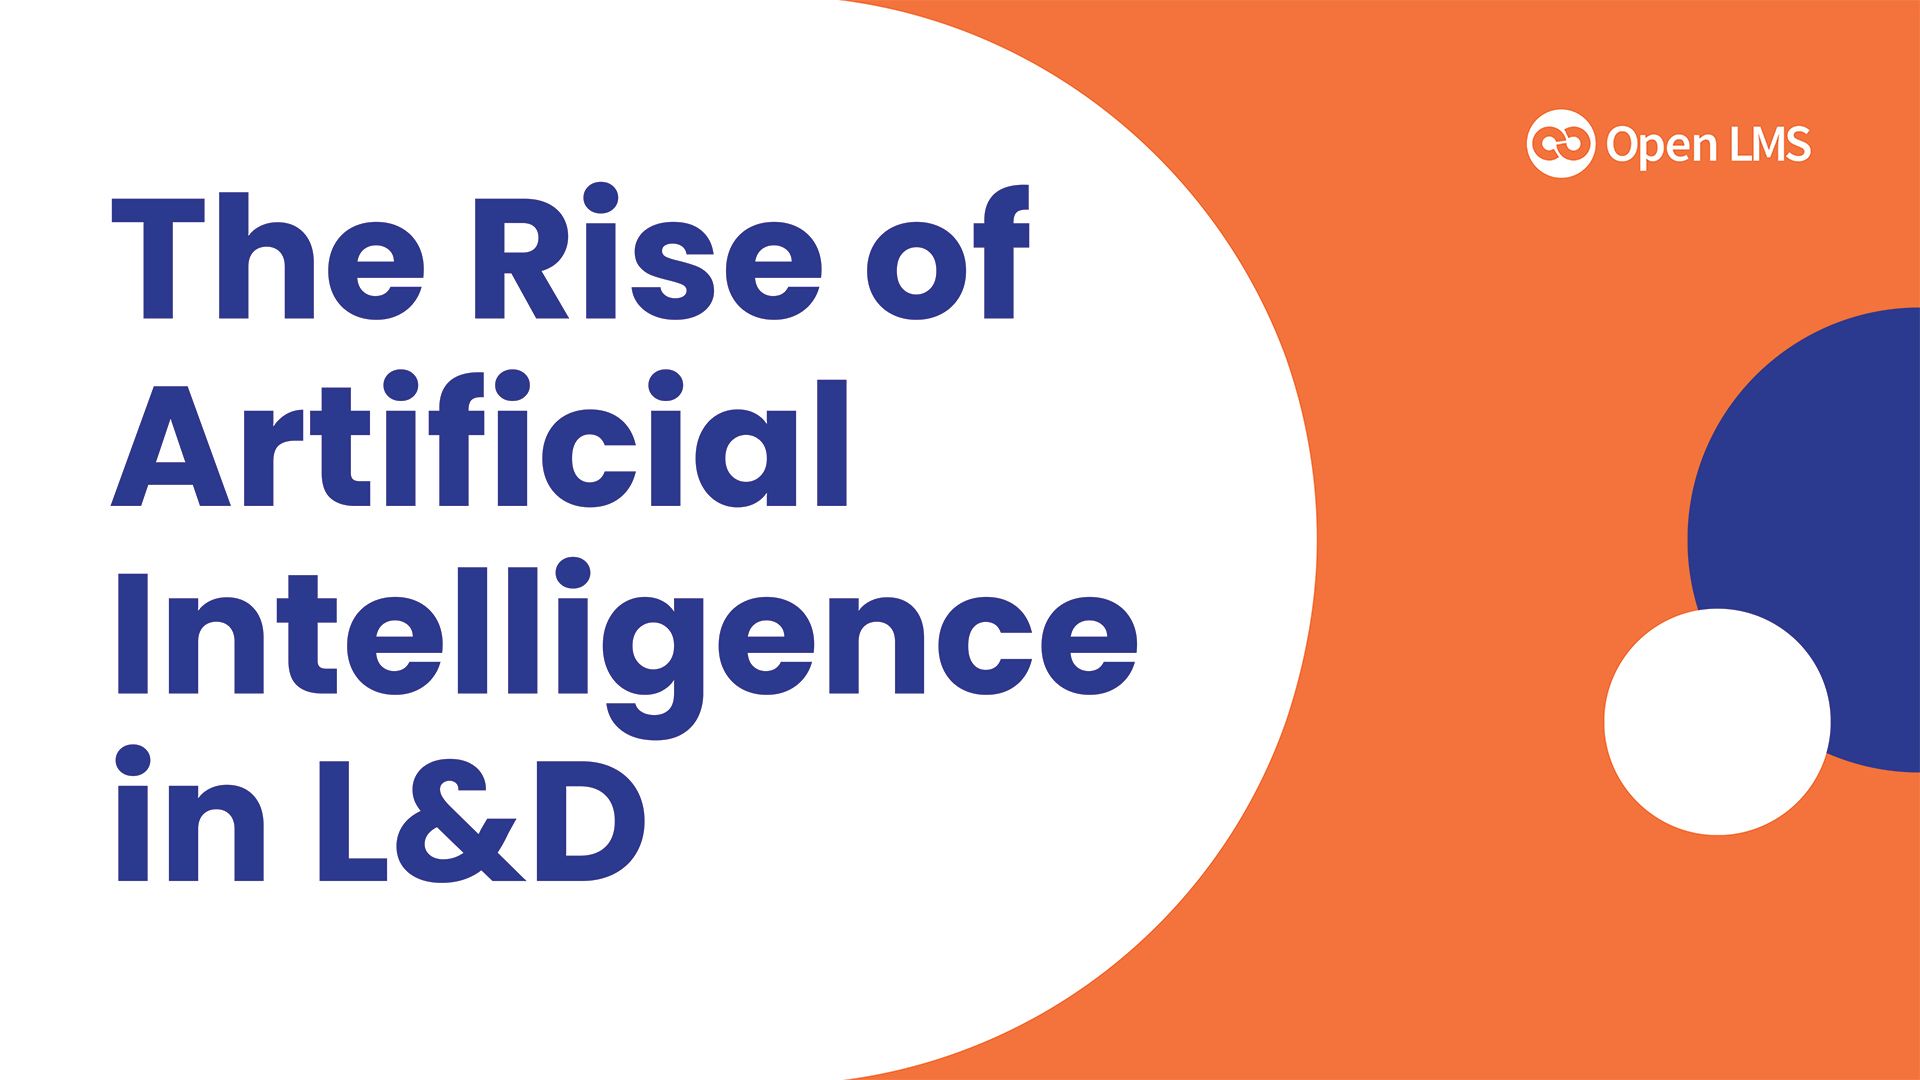 The Rise of Artificial Intelligence in L&D: New Opportunities and Challenges